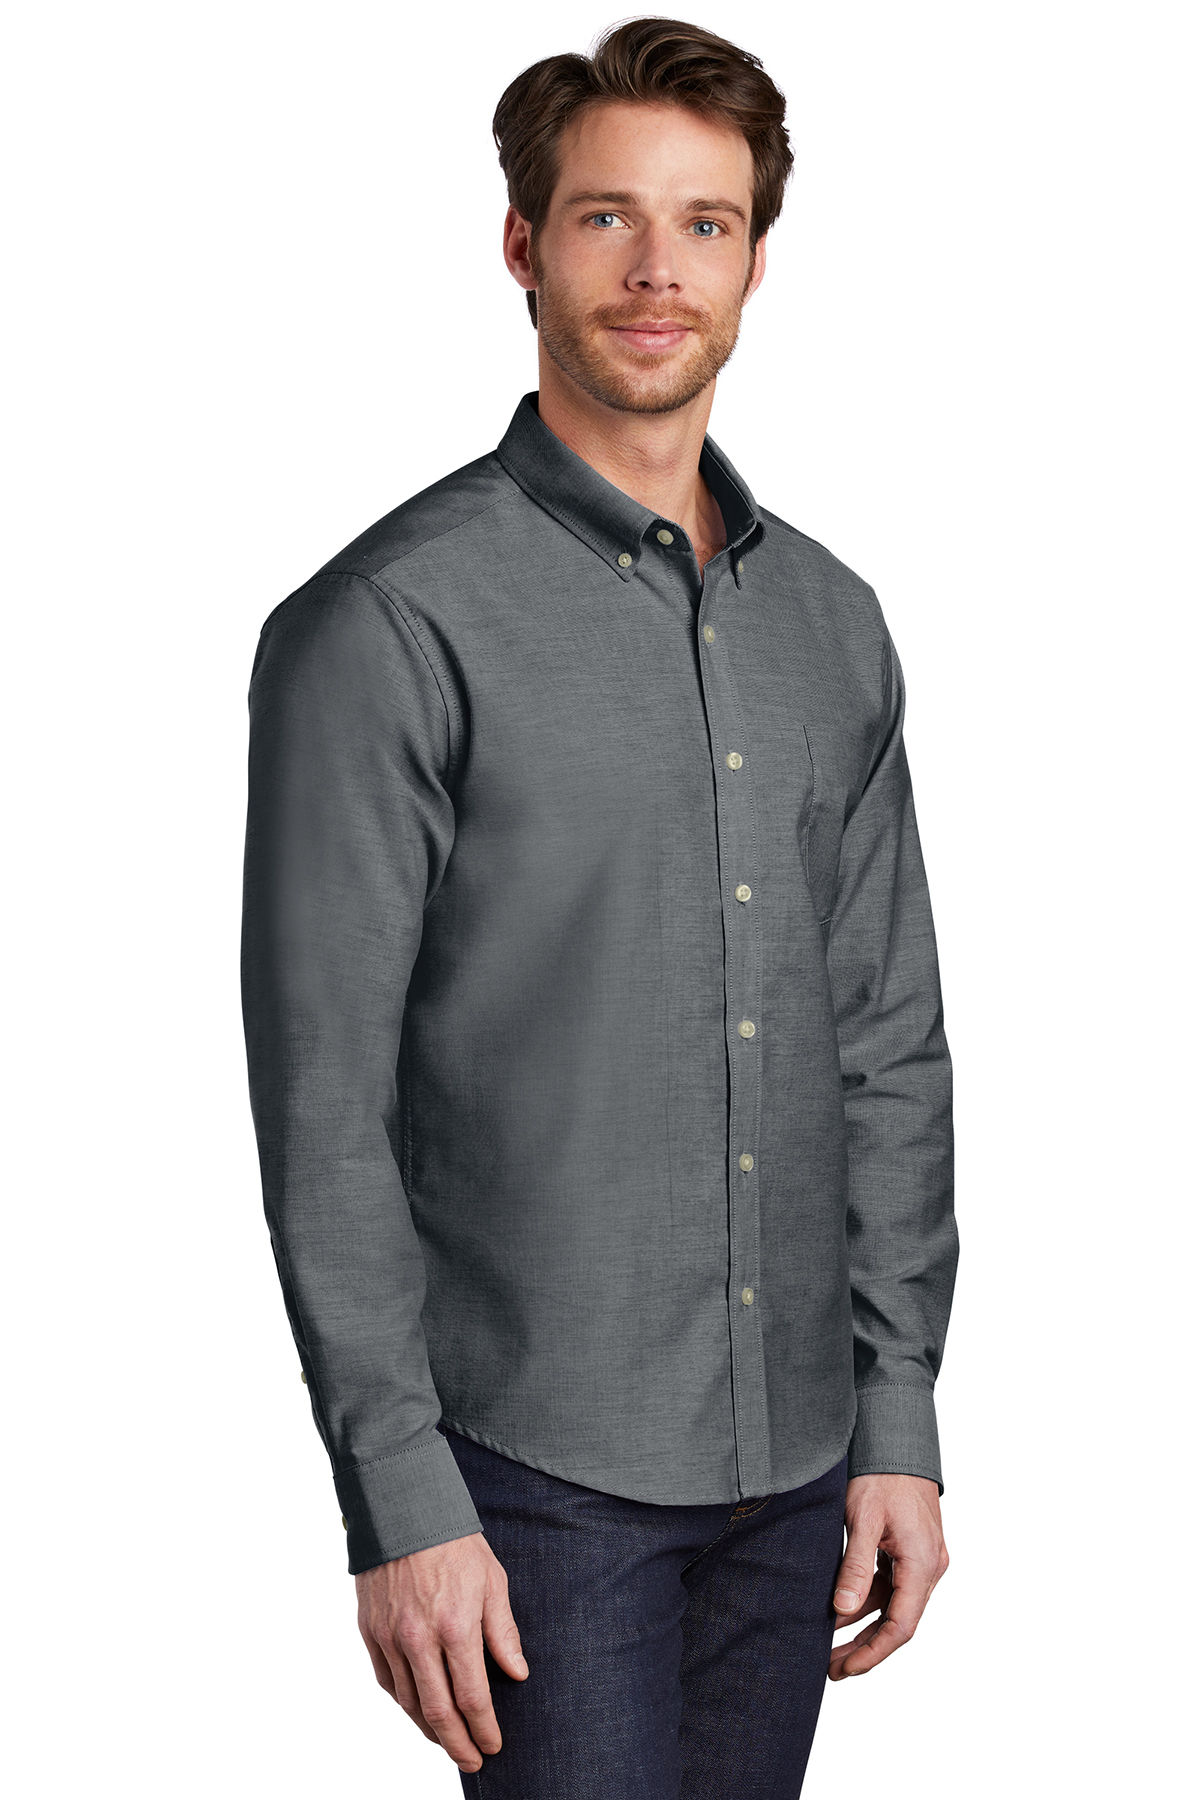 Port Authority Untucked Fit SuperPro Oxford Shirt | Product | Port ...